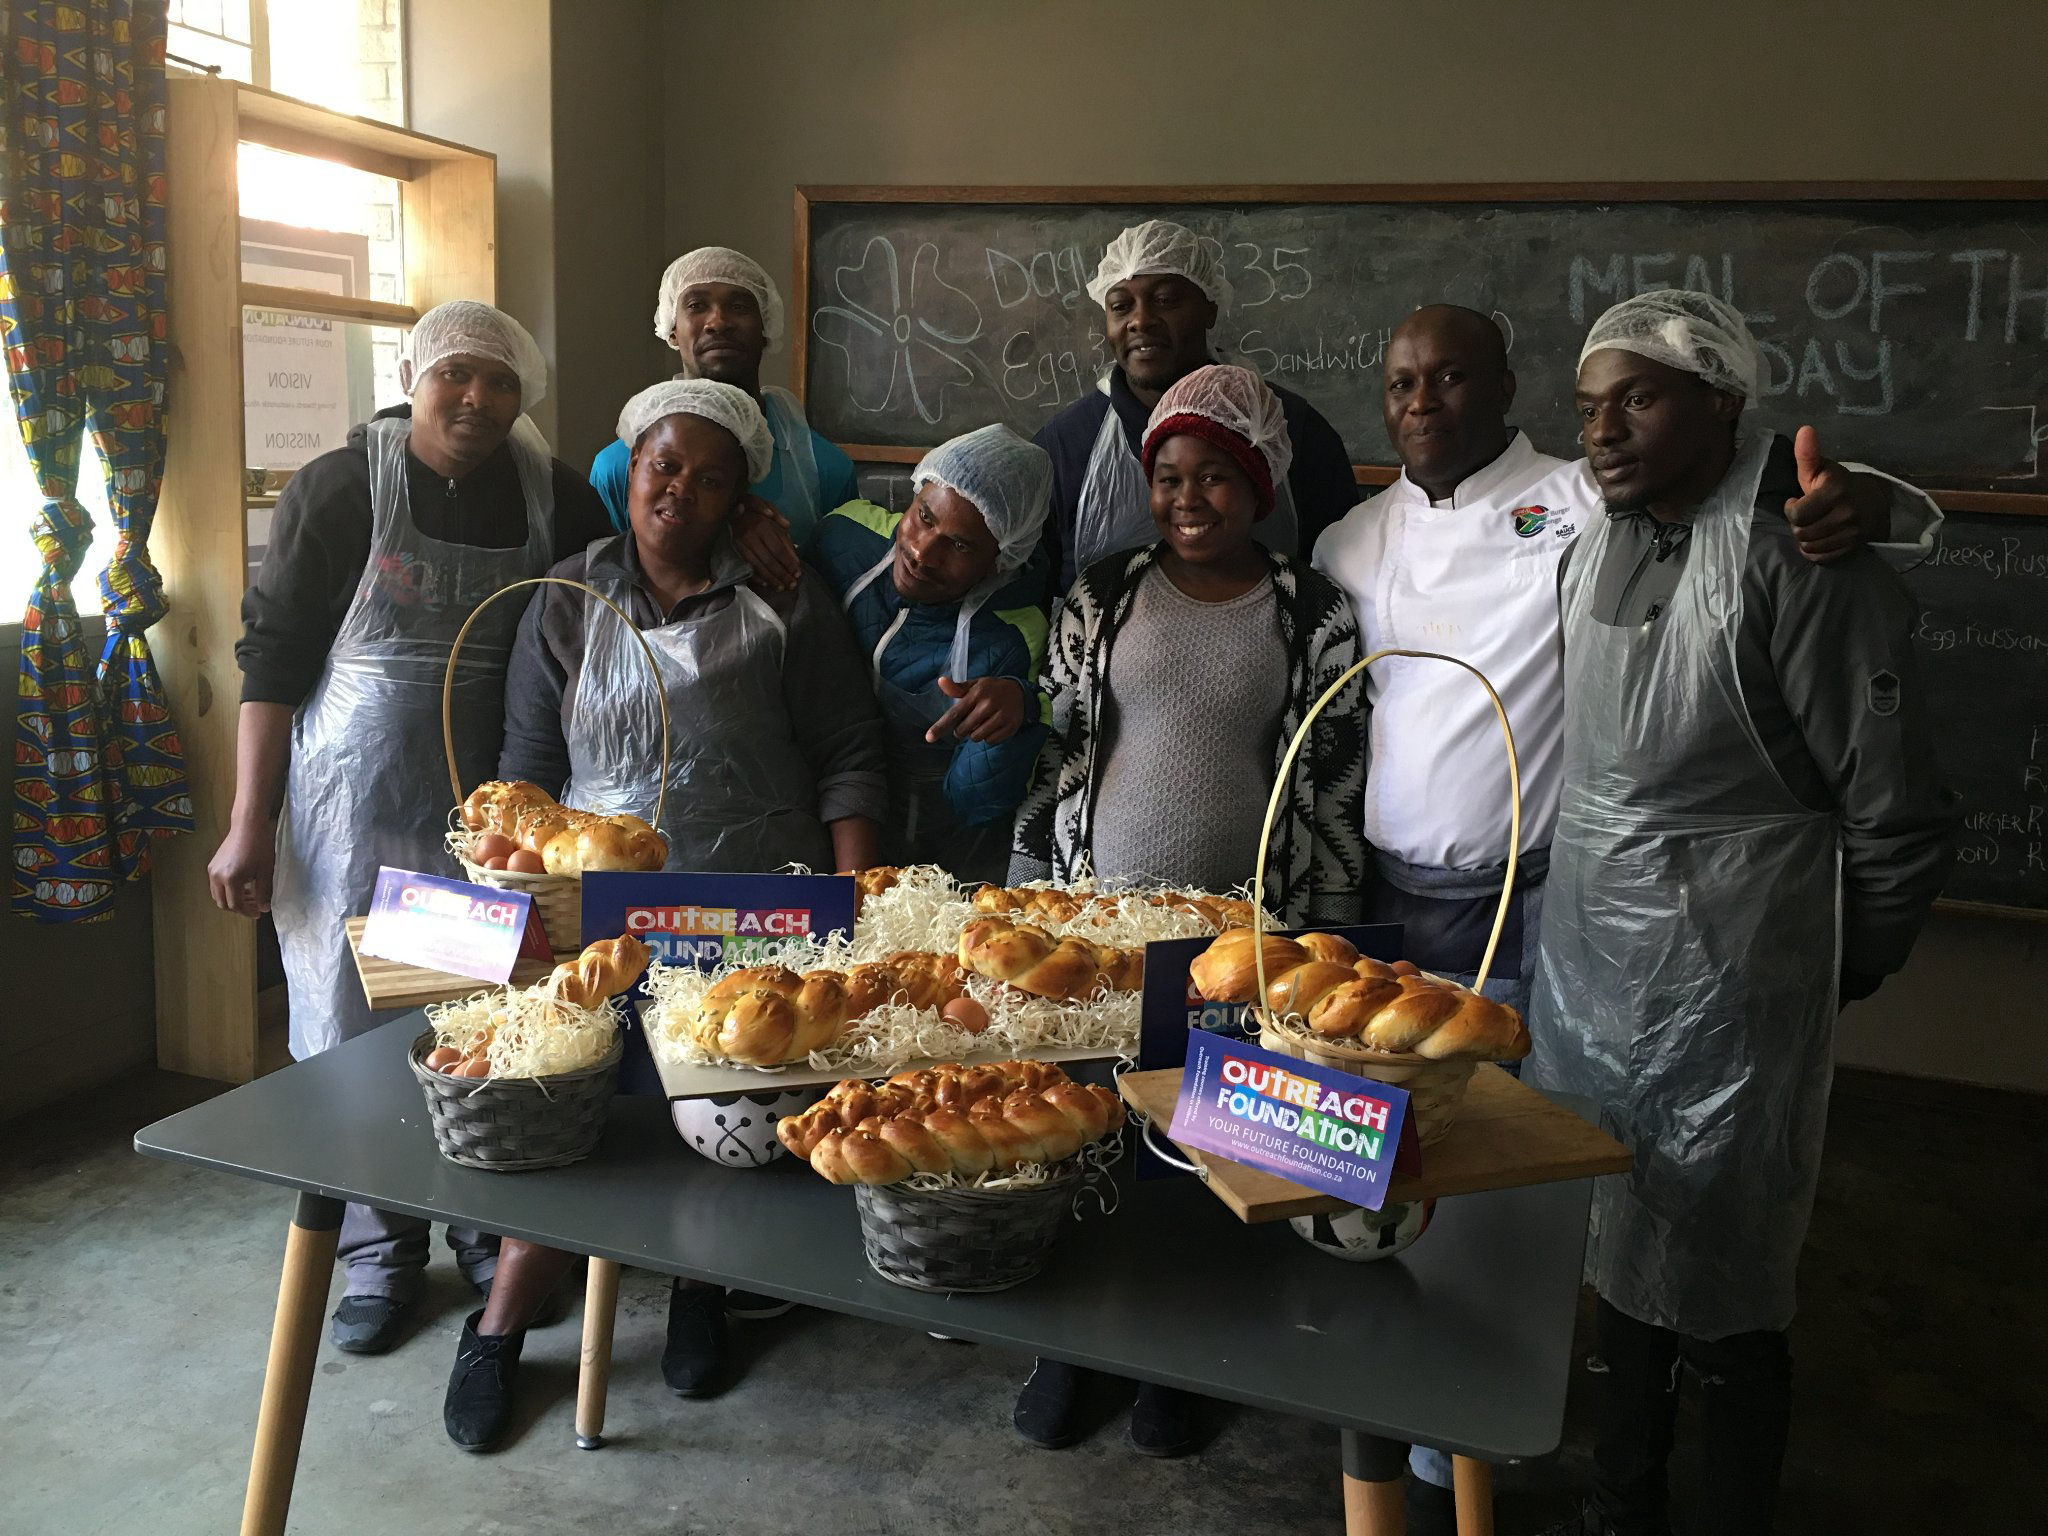 Baking is another skill taught at Outreach Foundation